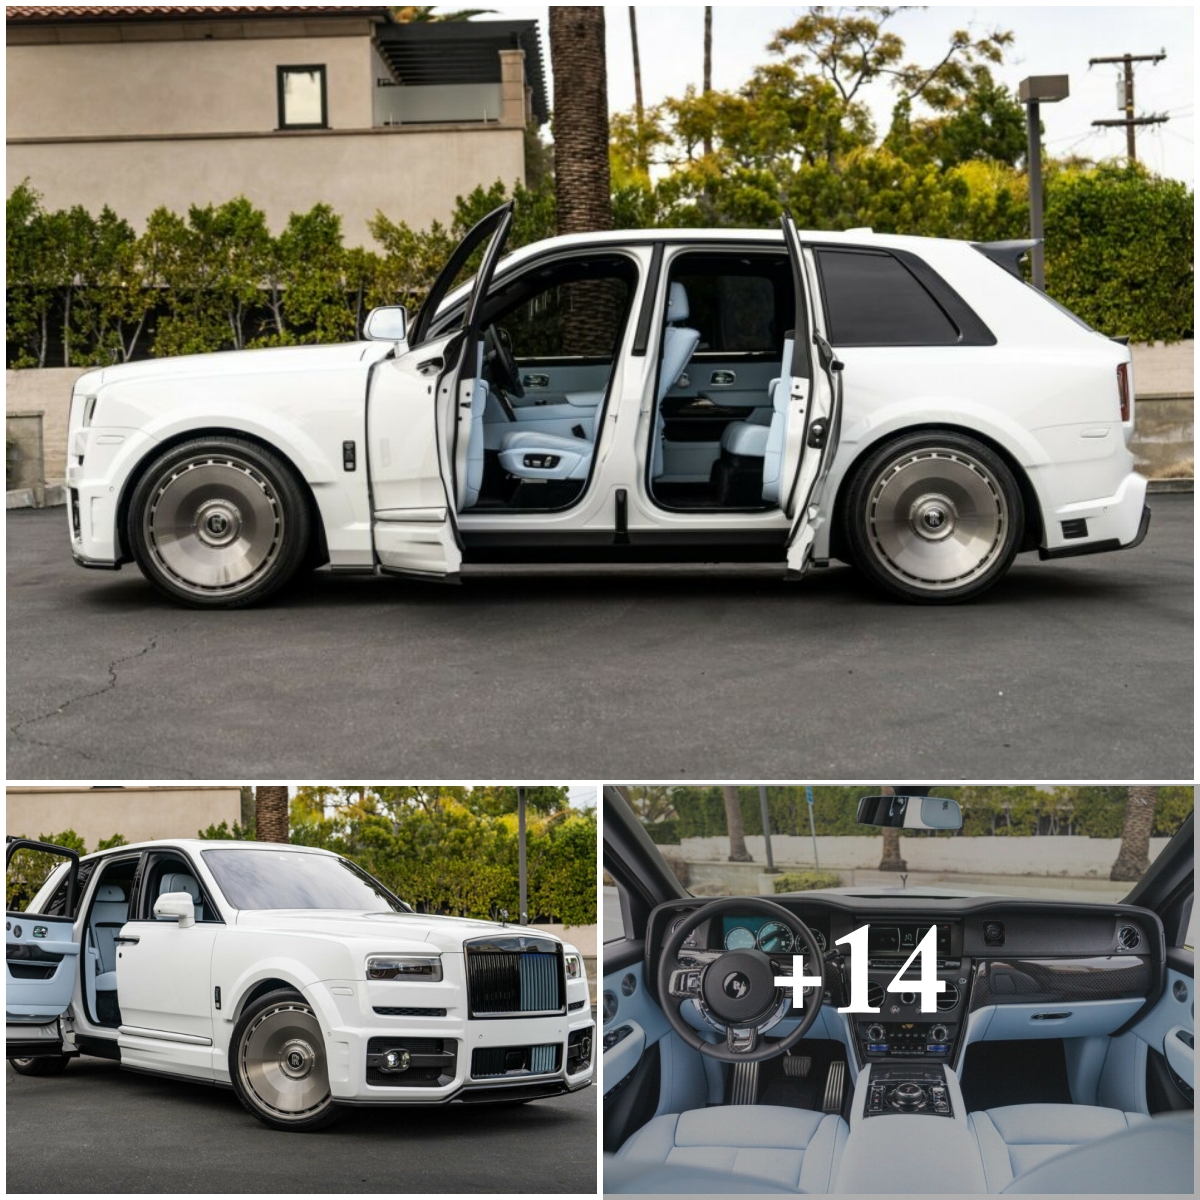 Is the $729,995 Price Tag Justified for This Modified Rolls-Royce Cullinan?